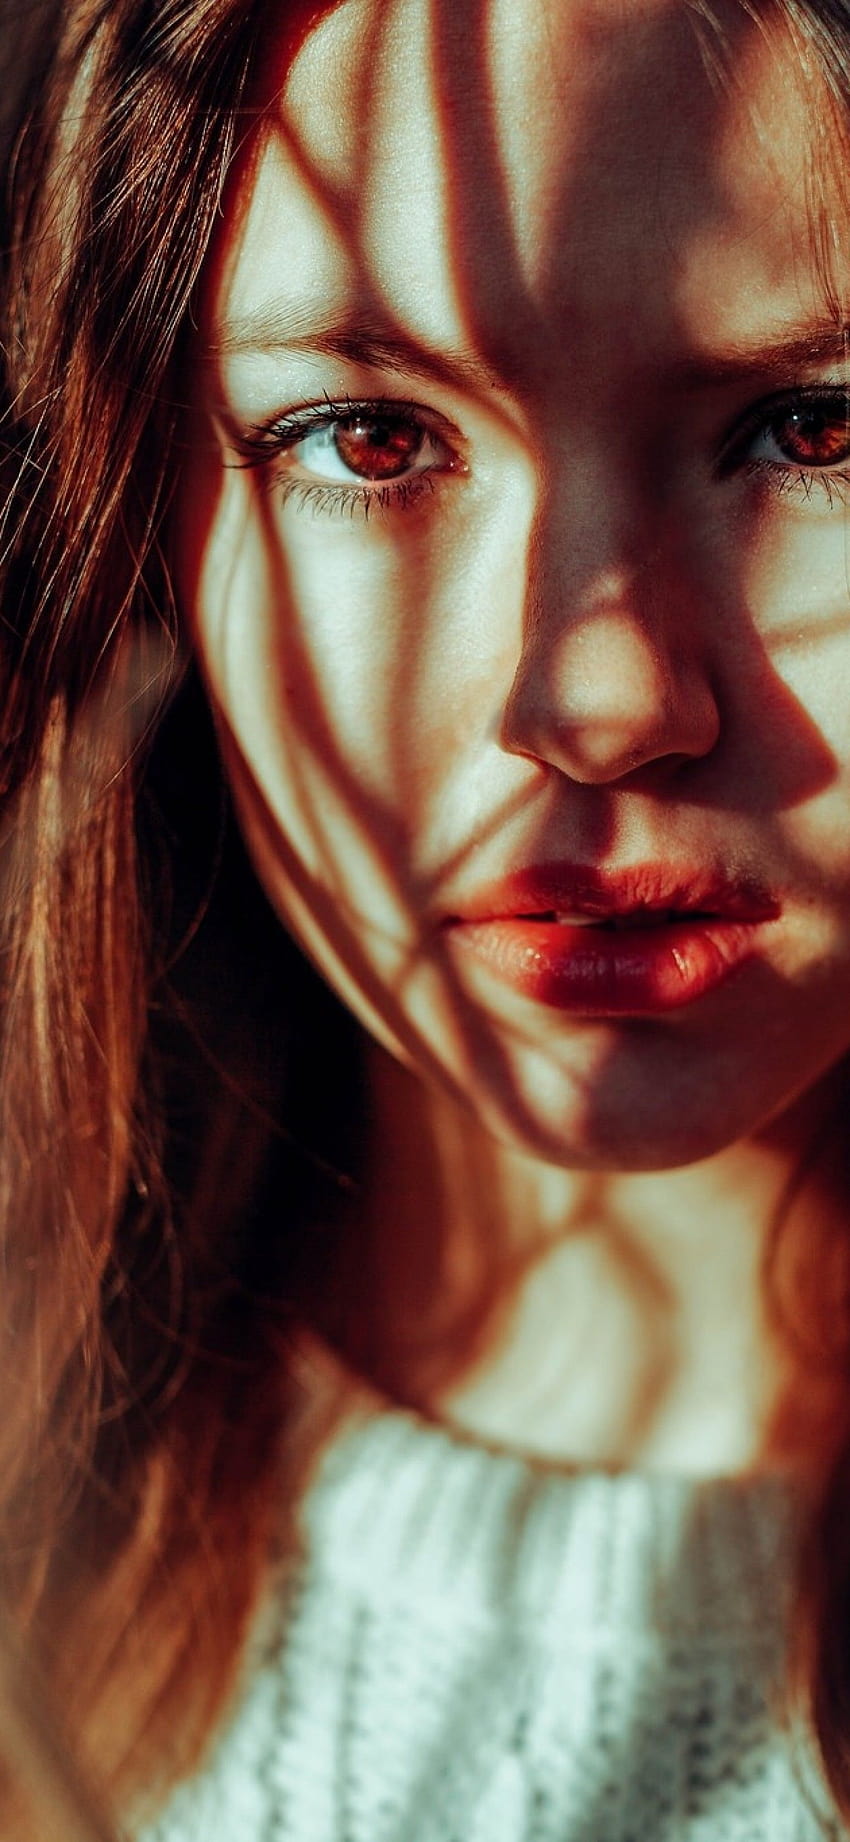 1440x3120 Brunette, Red Lipstick, Face Portrait, Shadow, shadow of ...